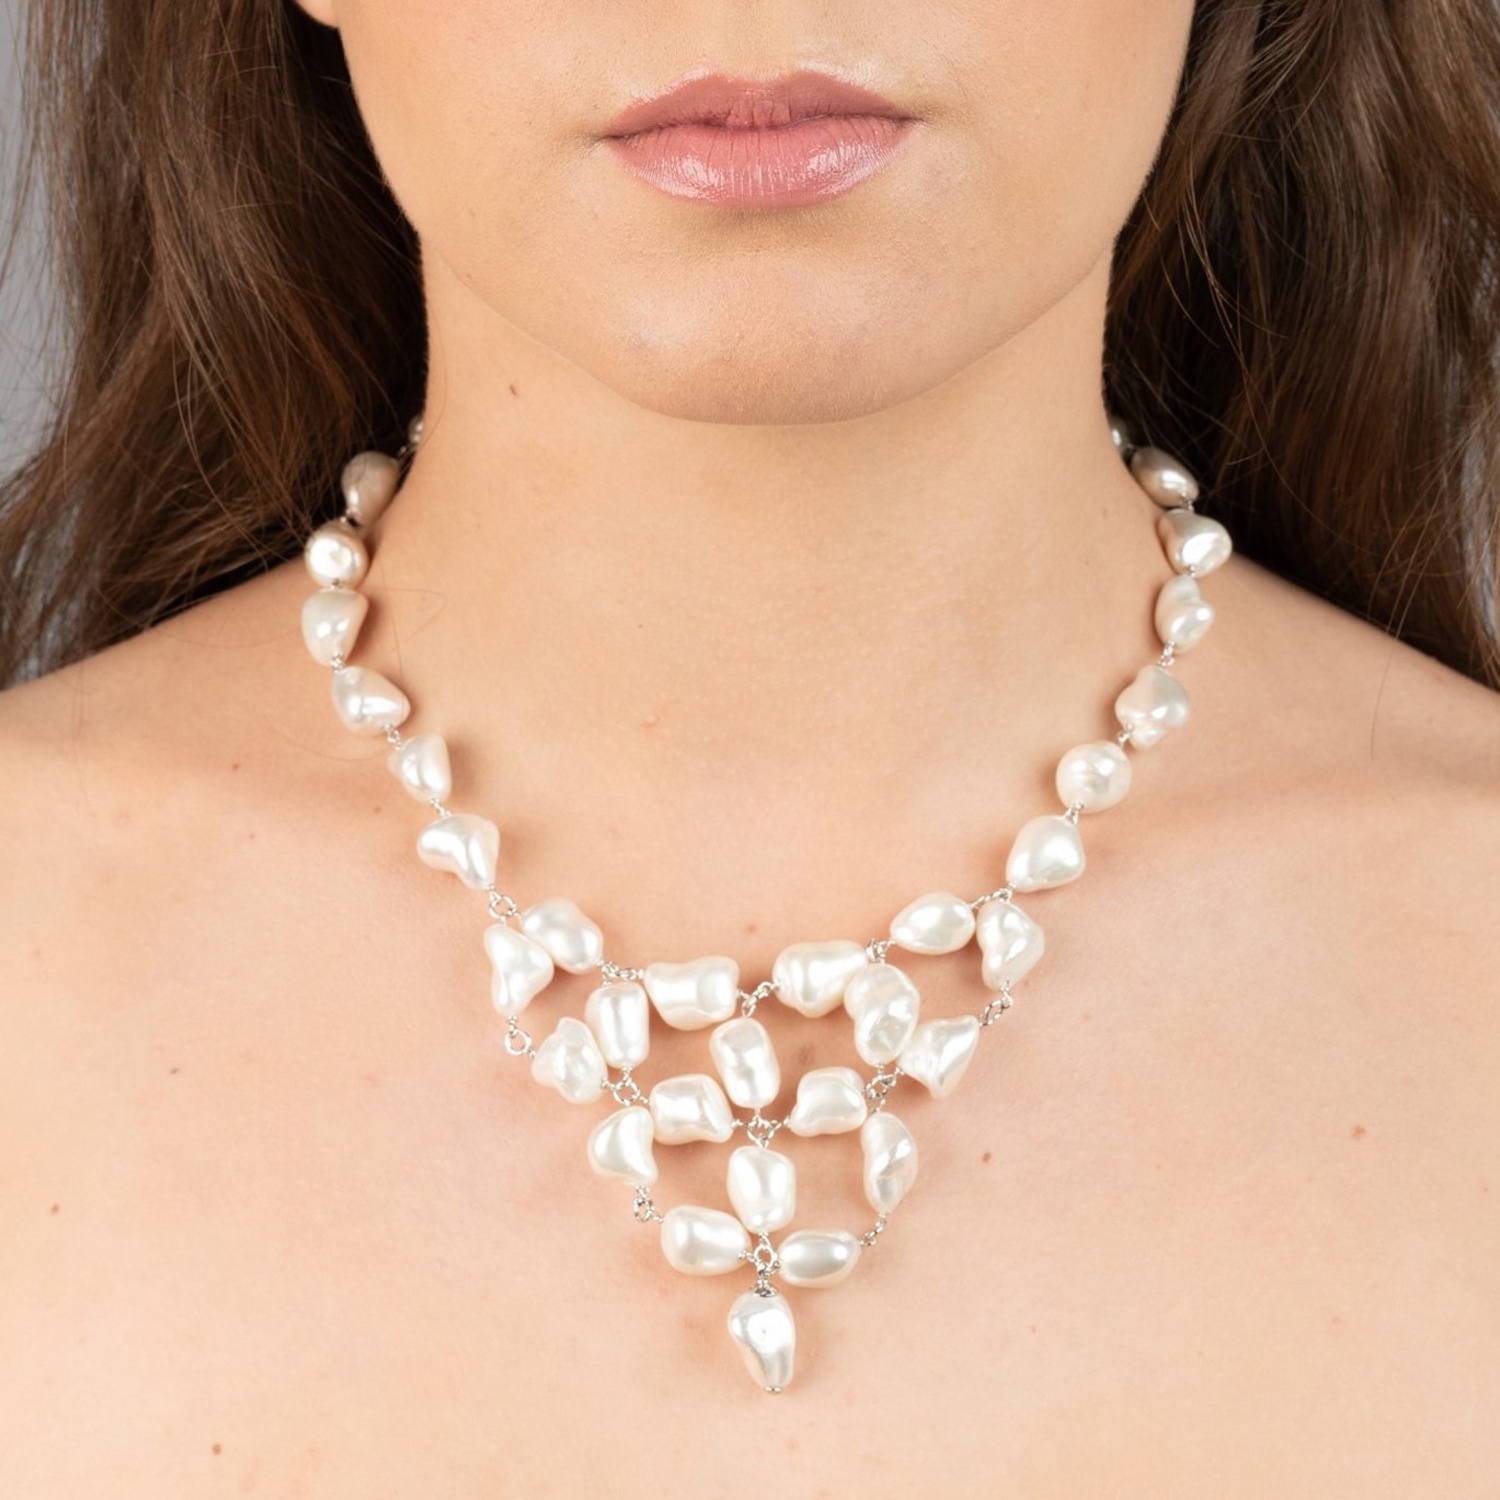 Necklace of Mother of pearls 3